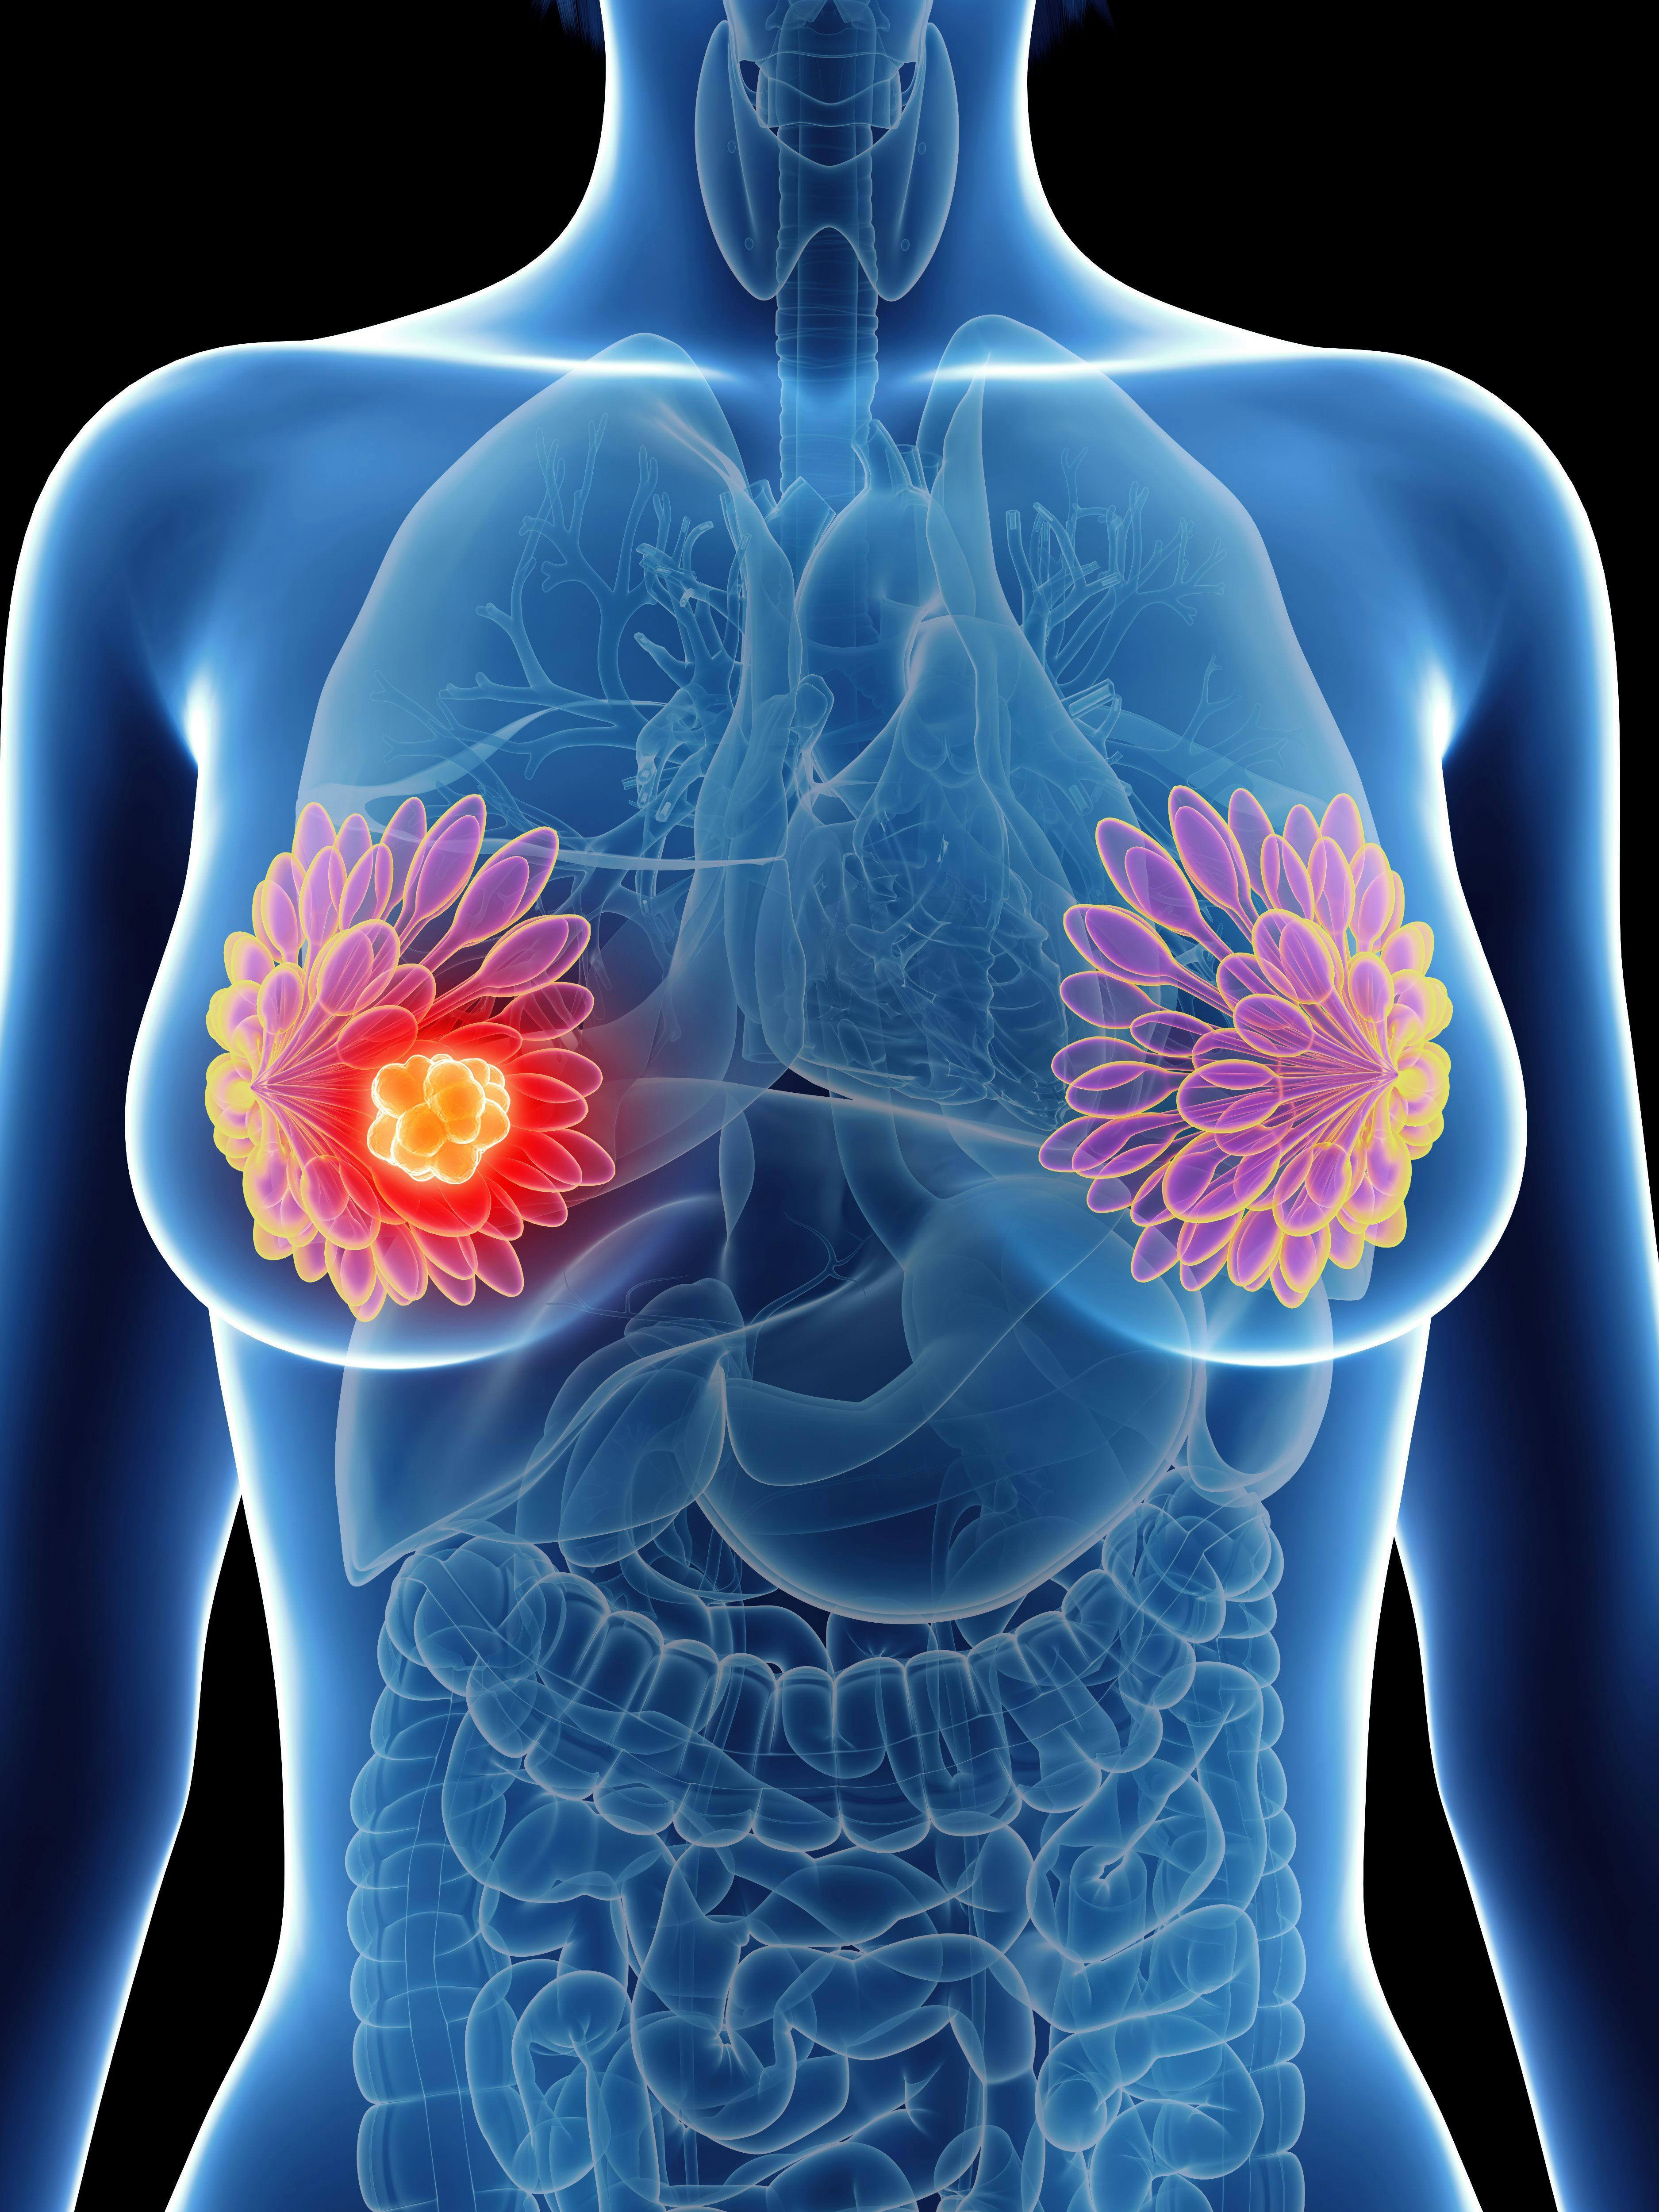 Patients with HER2-positive apocrine carcinoma of the breast are less likely to have an aggressive phenotype and are more likely to have favorable outcomes, even though the group has a lower rate of estrogen and progesterone receptor positivity.